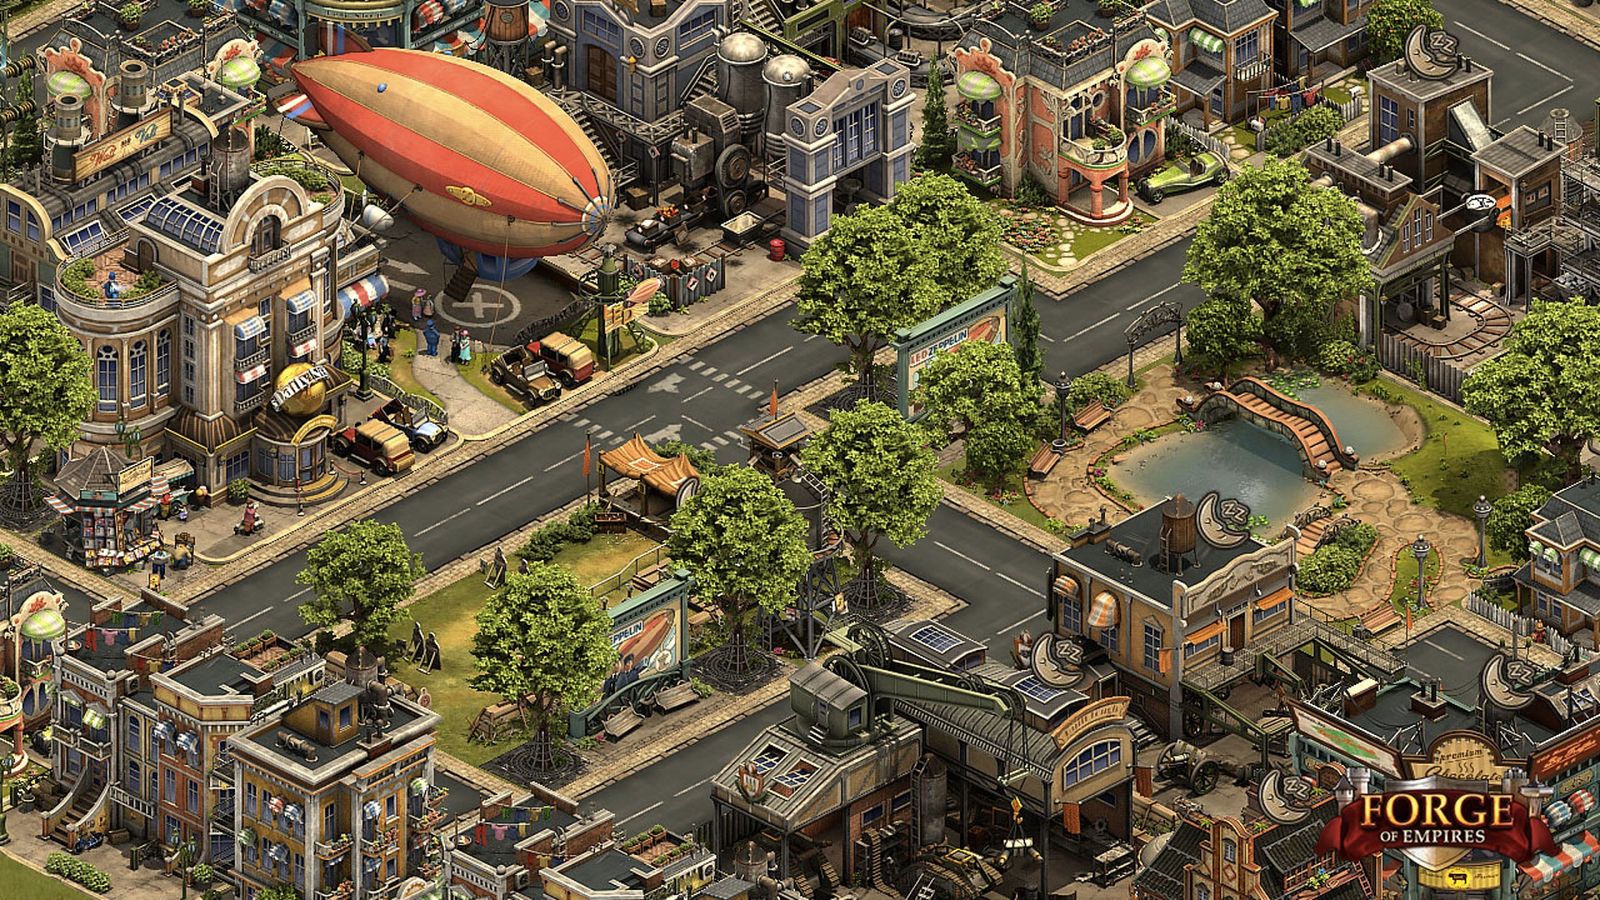 Image of a steampunk city in Forge of Empires.